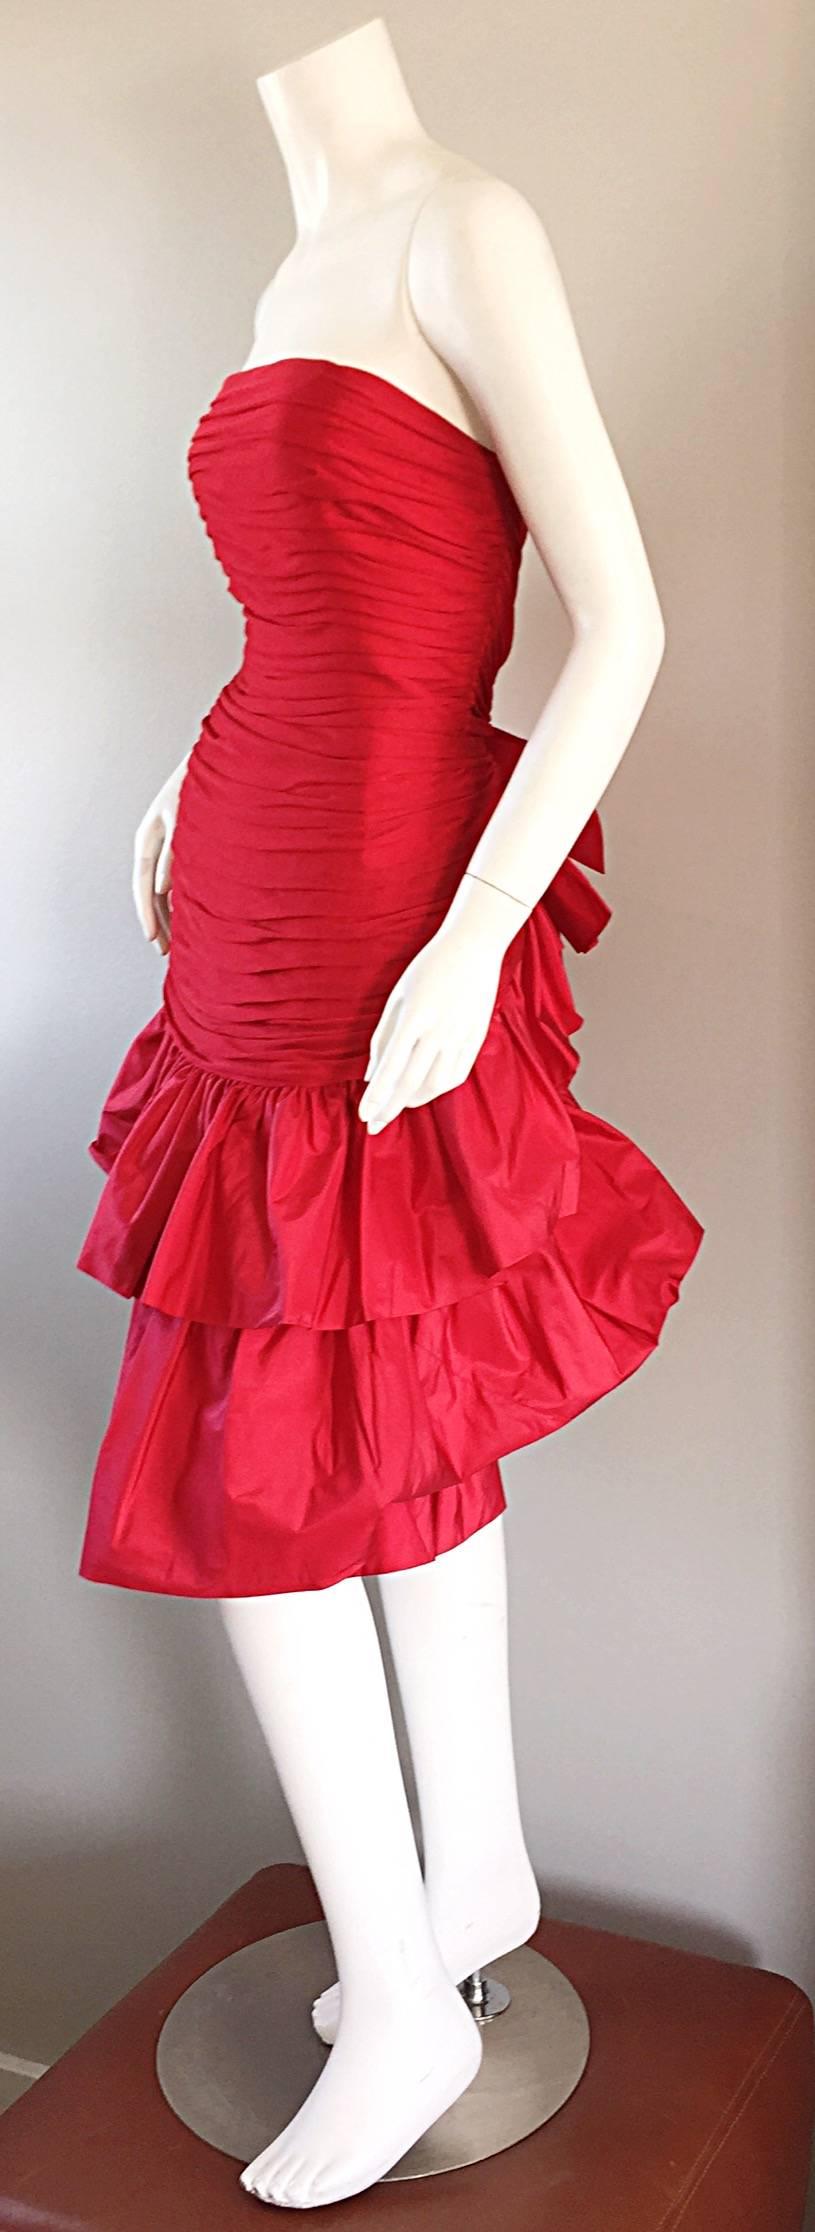 Amazing 80s JILL RICHARDS, for SAKs Fifth Avenue, red silk + taffeta dress!!! Avant Garde feel, with tiered skirt, and bow in the back. Tulle layers over the silk bodice. Pouf skirt, with a bit of a drop waist. Couture quality, with hand finished